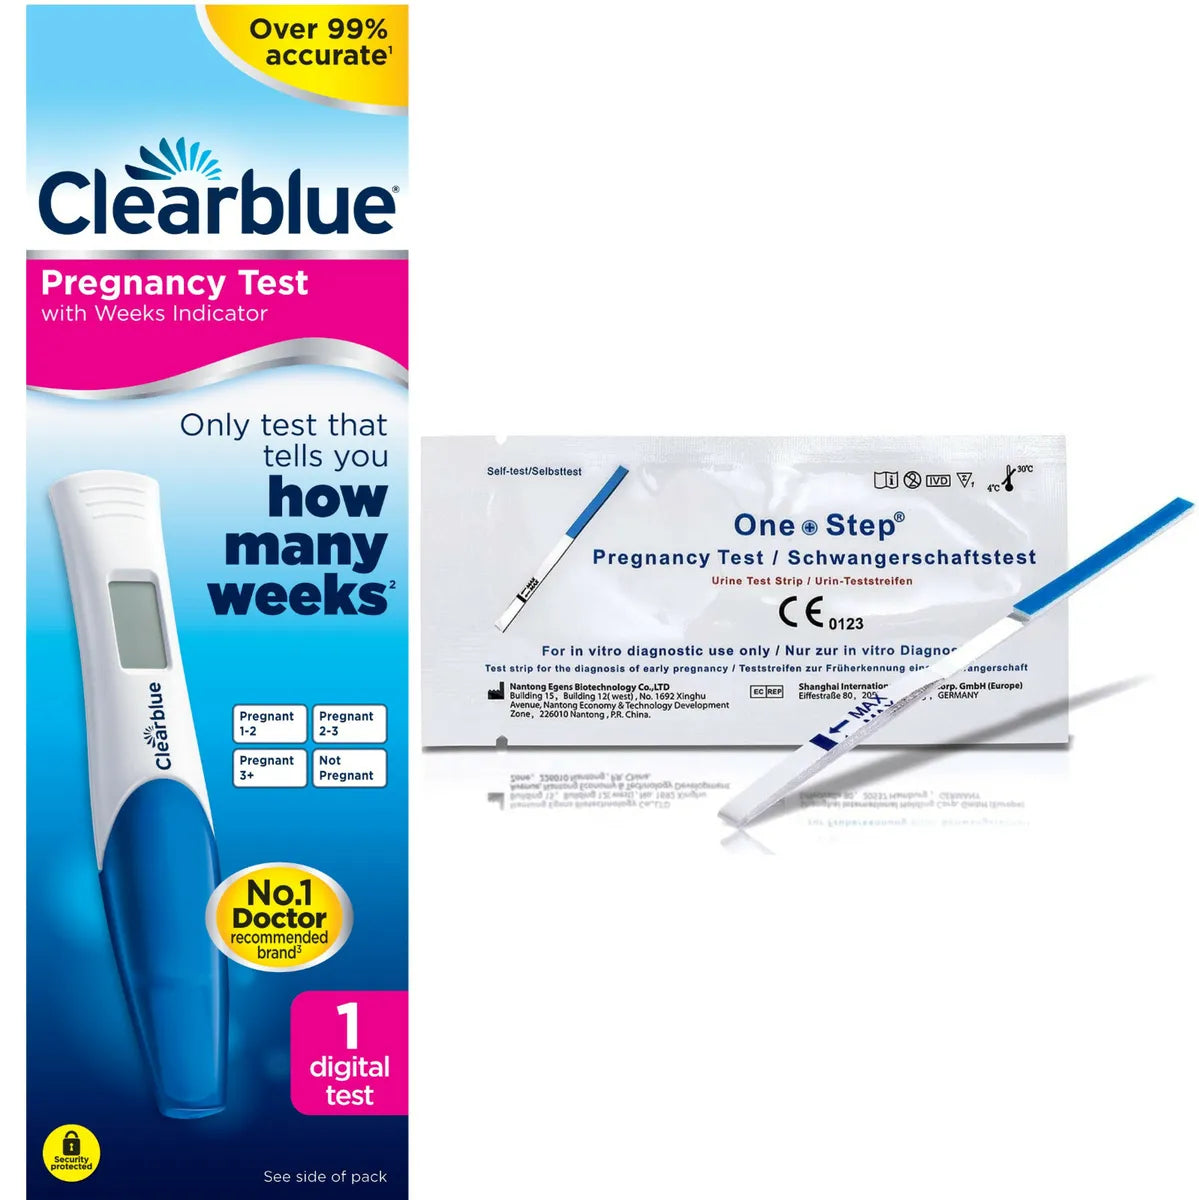 Pregnancy Tests - Clearblue Digital Pregnancy Test with Conception Indicator - Medaid - Lebanon